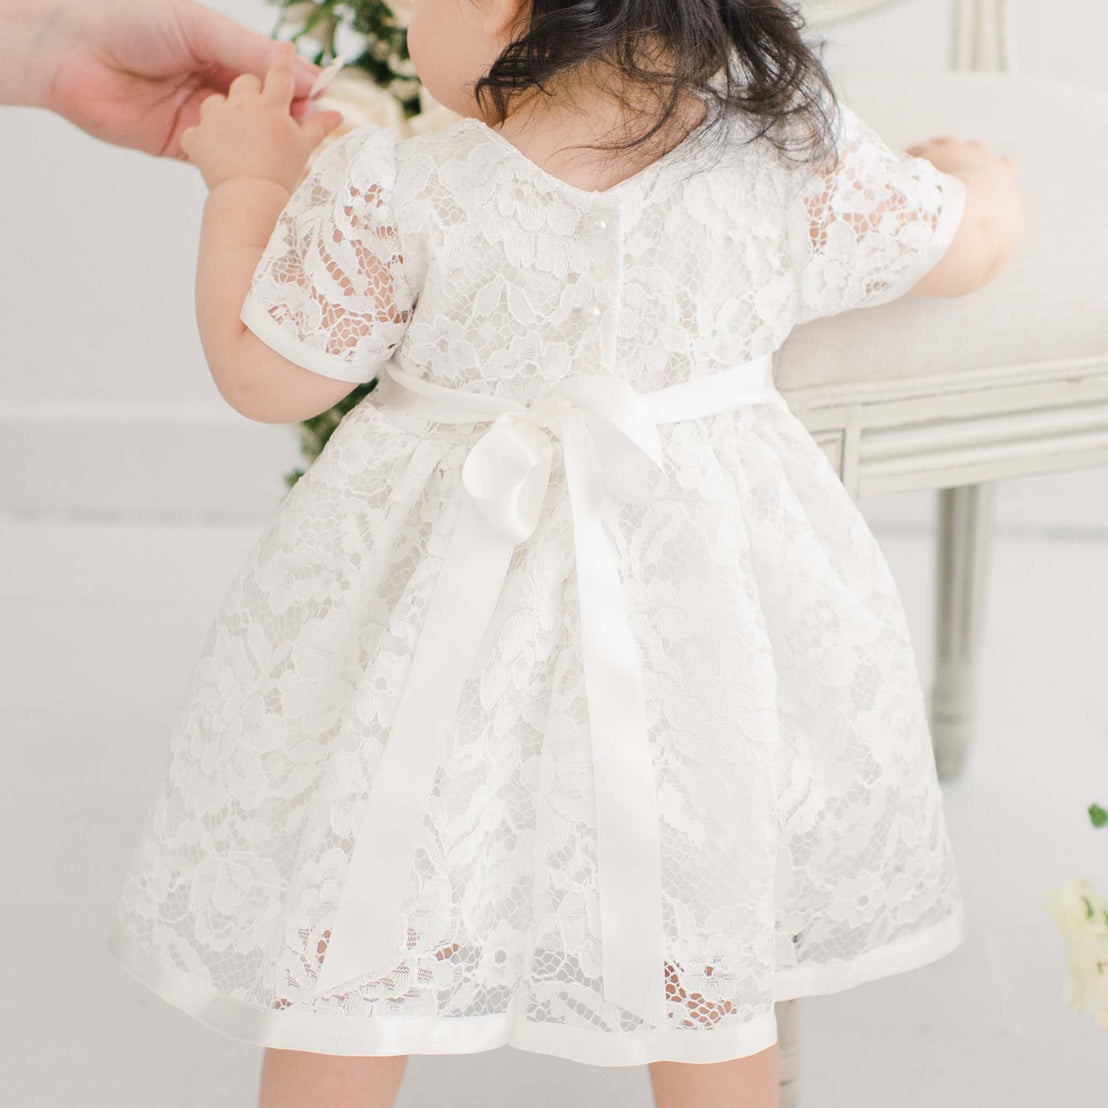 A toddler in a white Rose Romper Dress with a silk ribbon stands next to an elegant chair, reaching up towards an adult's hand, in a bright, softly lit room.